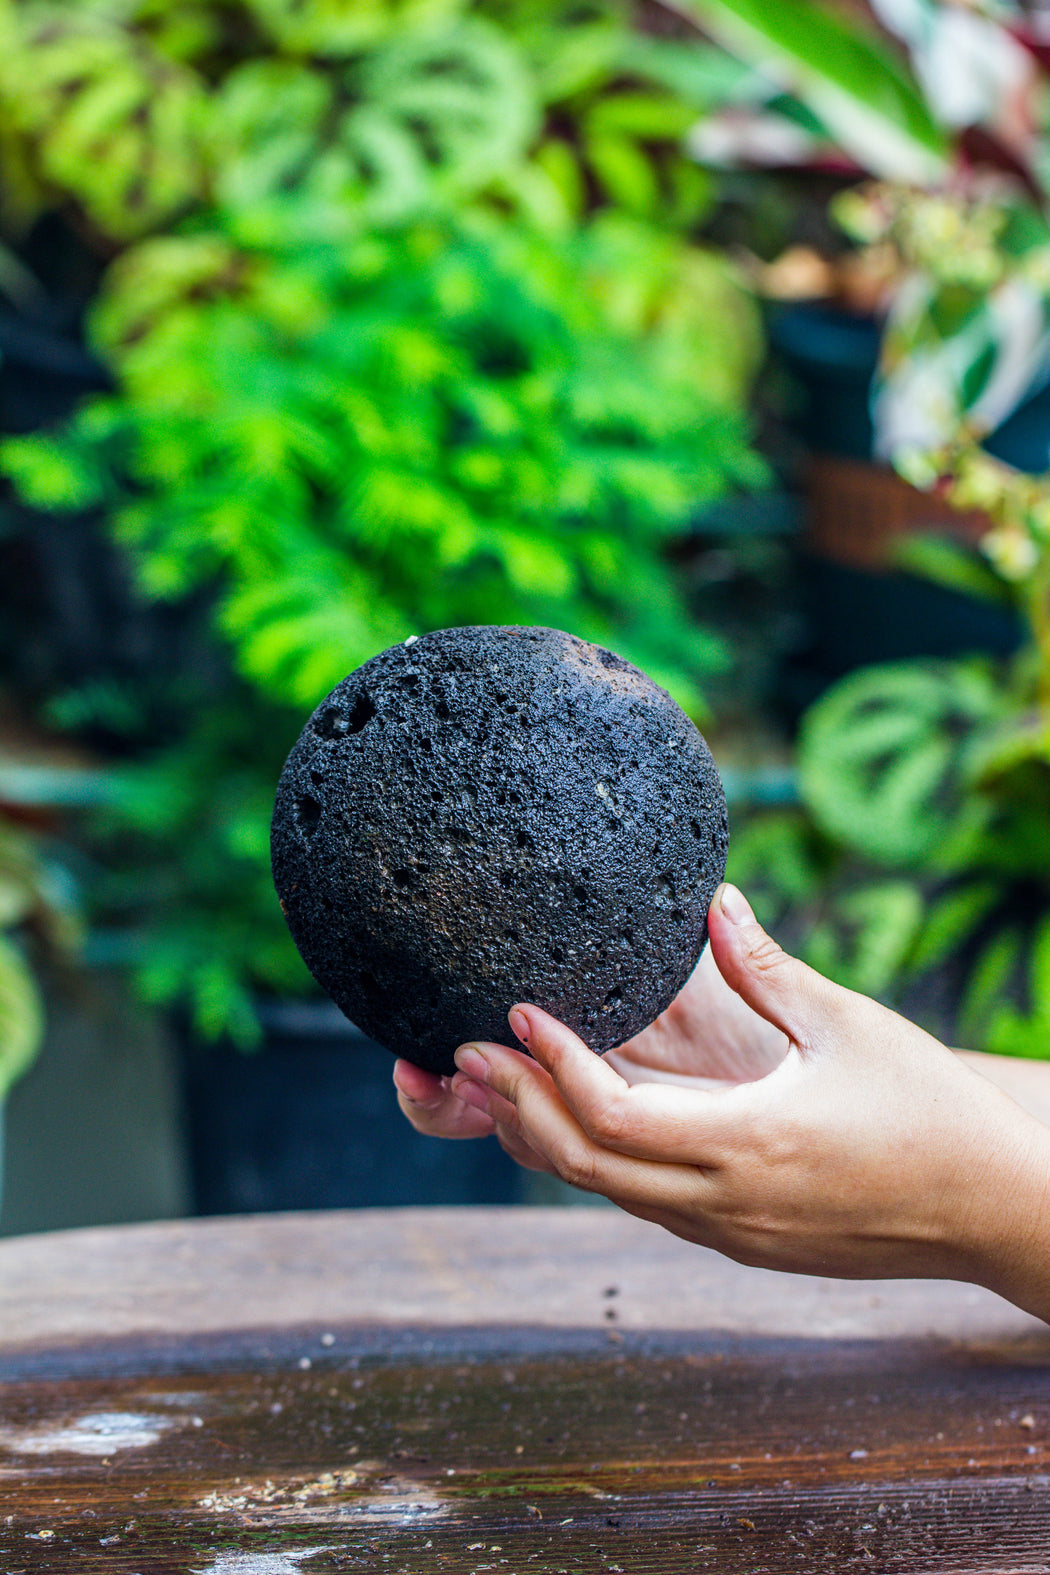 12cm / 4.7" Round Red Horticultural Lava Rock Volcanic Rock Planter for succulents, moss, tropical palants, terrariums - NCYPgarden